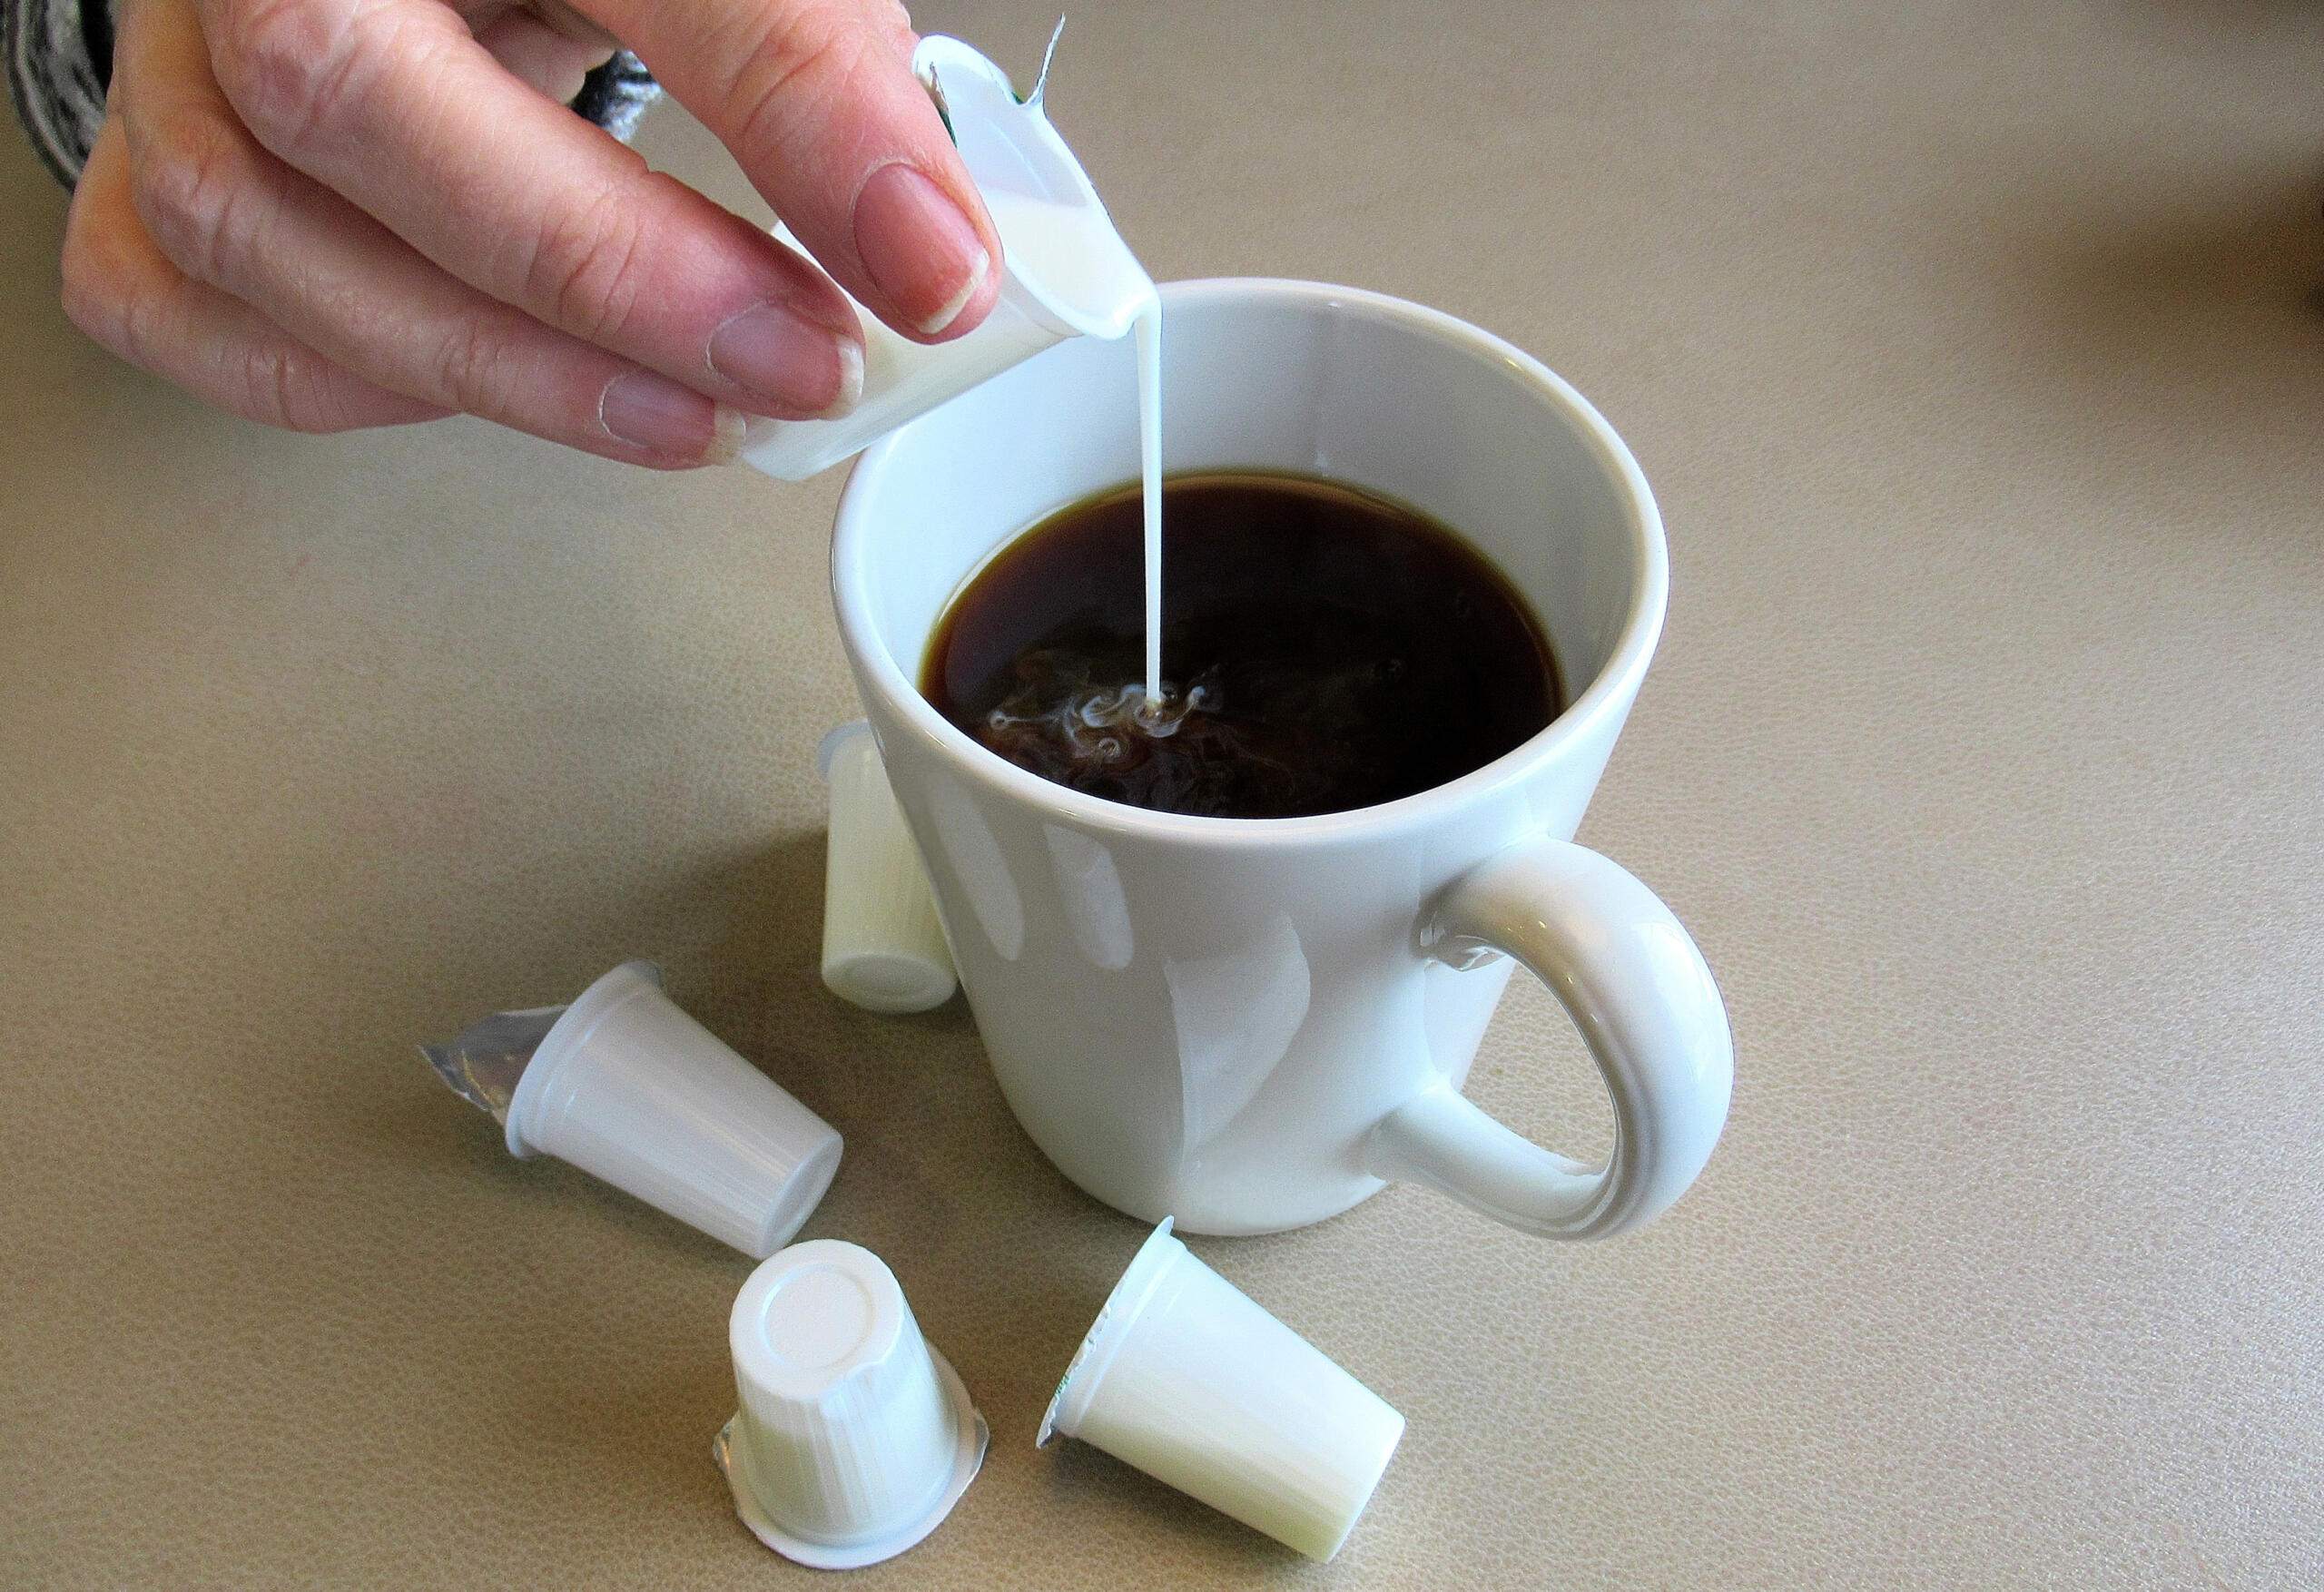 Does Coffee Creamer Cause Inflammation?